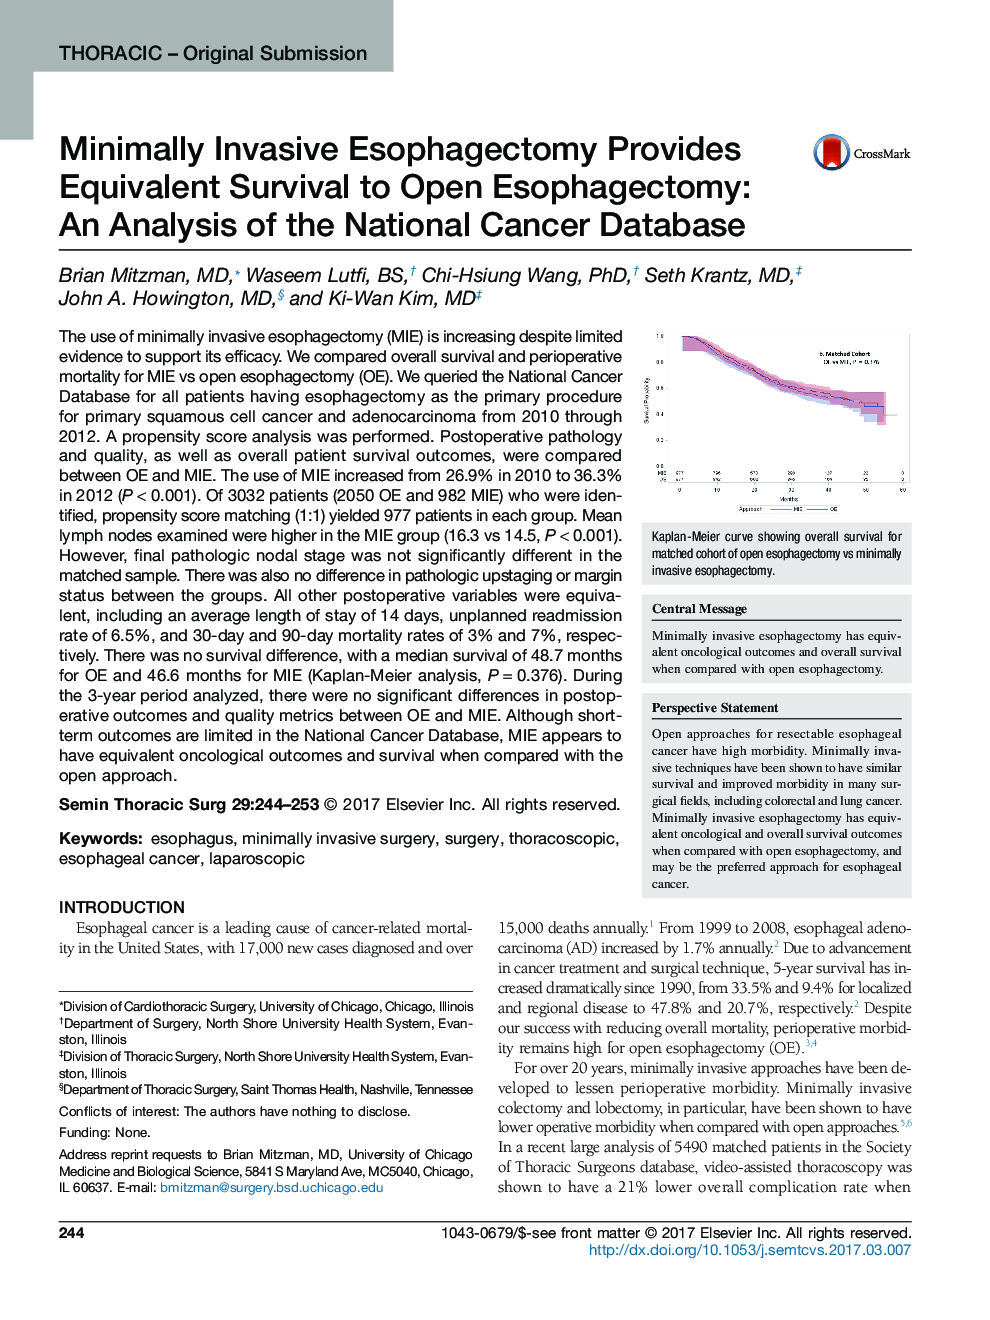 Thoracic - Original SubmissionMinimally Invasive Esophagectomy Provides Equivalent Survival to Open Esophagectomy: An Analysis of the National Cancer Database